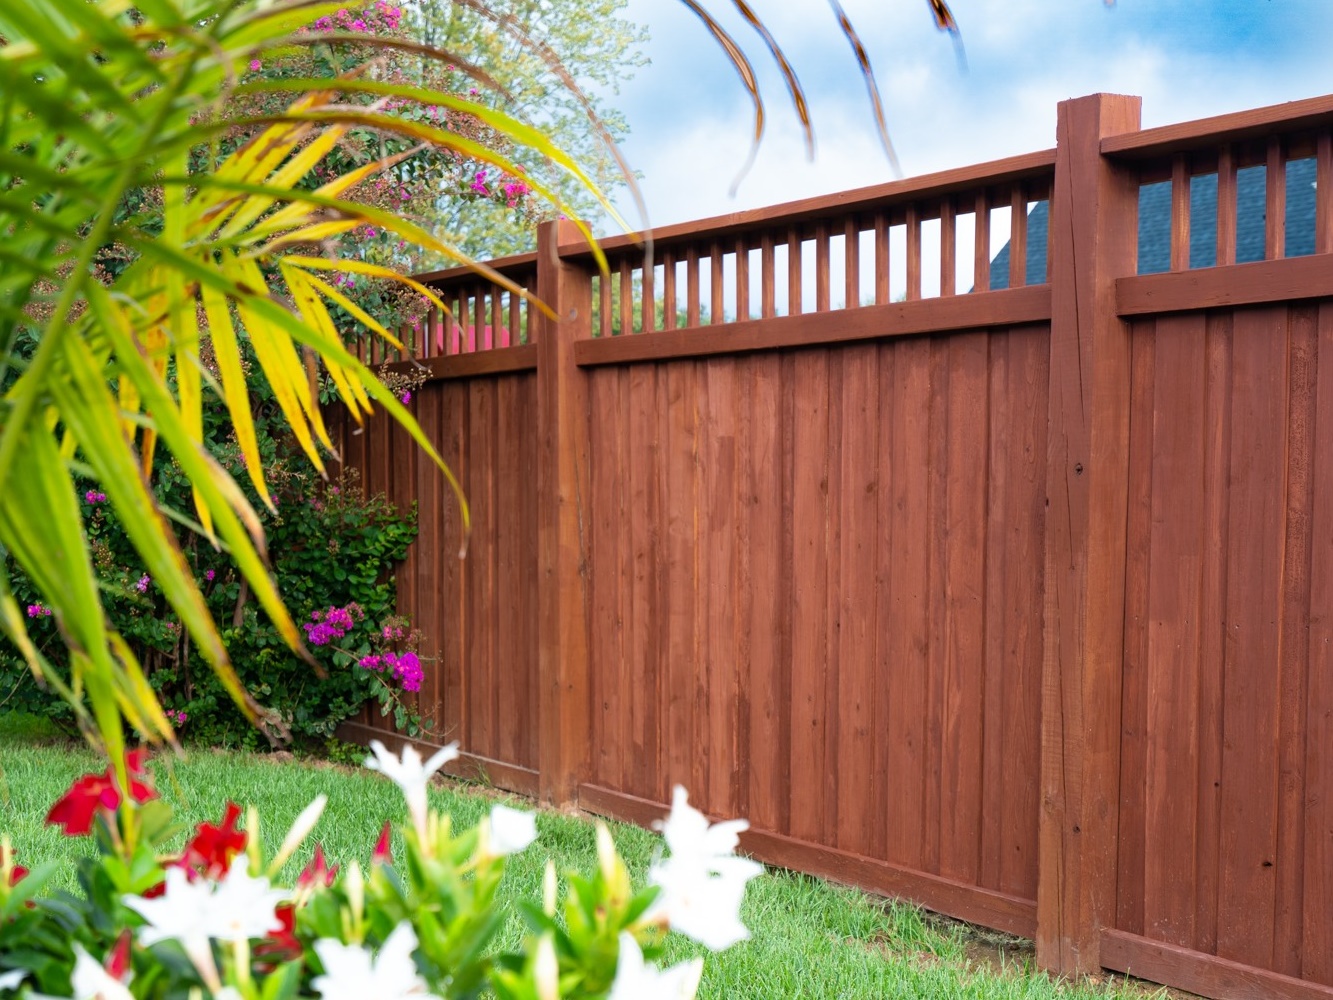 Masonville KY Spindle Top style wood fence